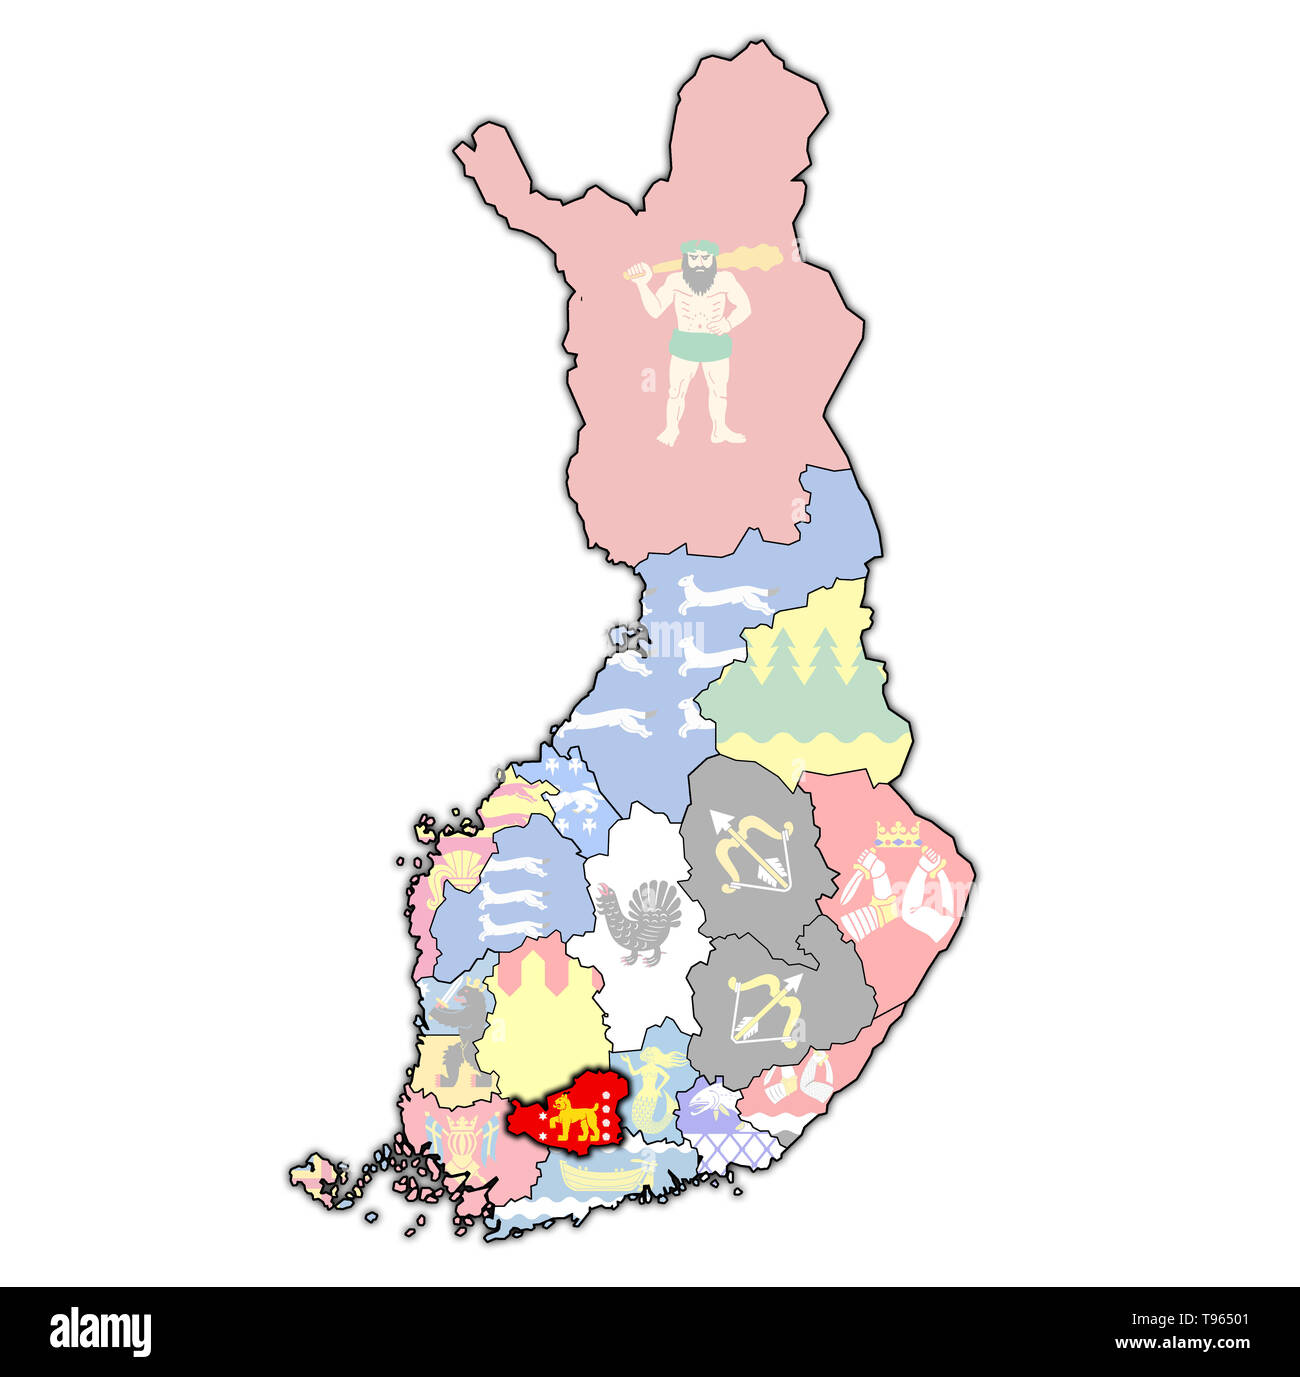 territory of Tavastia Proper region on map of administrative divisions of Finland with clipping path Stock Photo